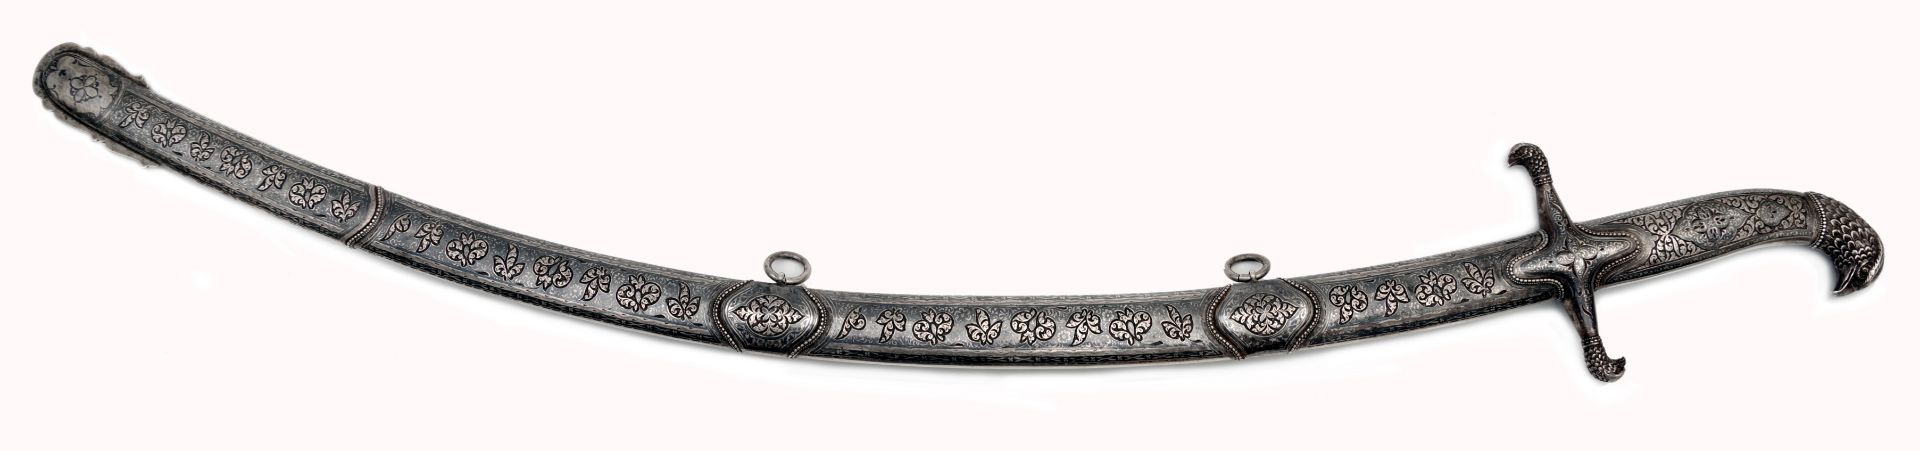 A Fabulous Russian Imperial Presentation Sword in Niello Silver Mounts - Image 4 of 6